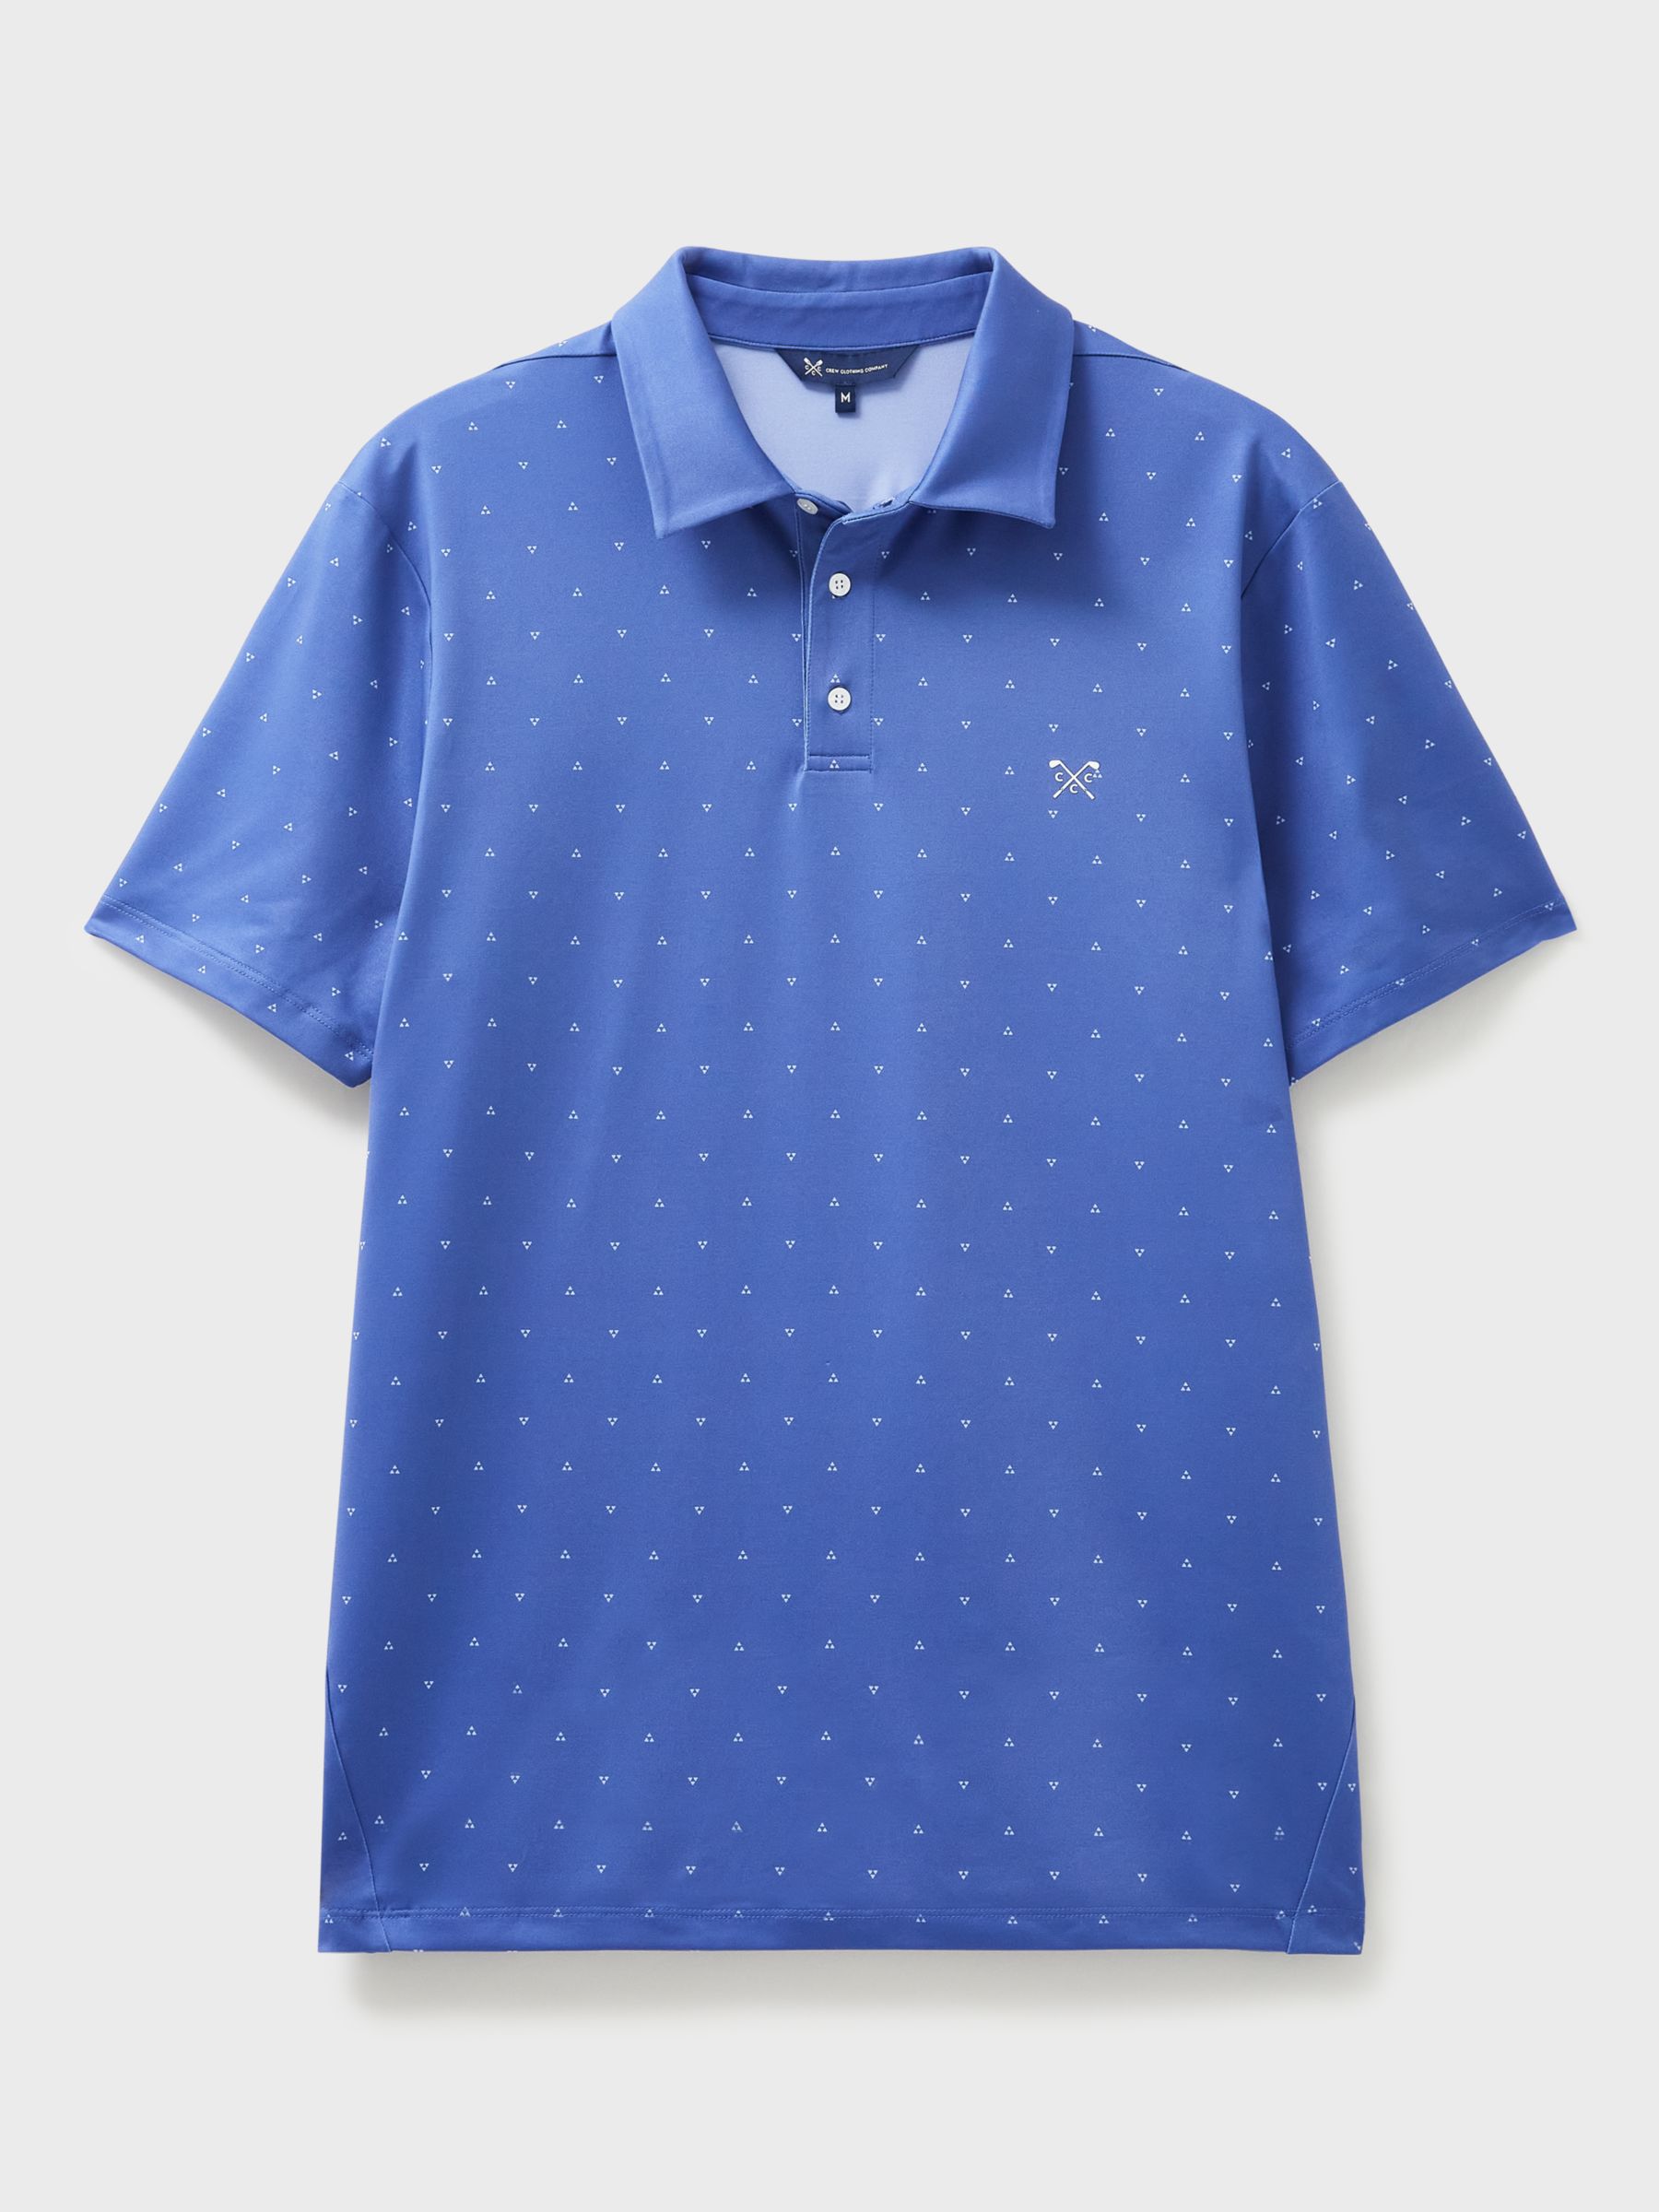 Buy Crew Clothing Match Golf Polo Shirt, Mid Blue Online at johnlewis.com